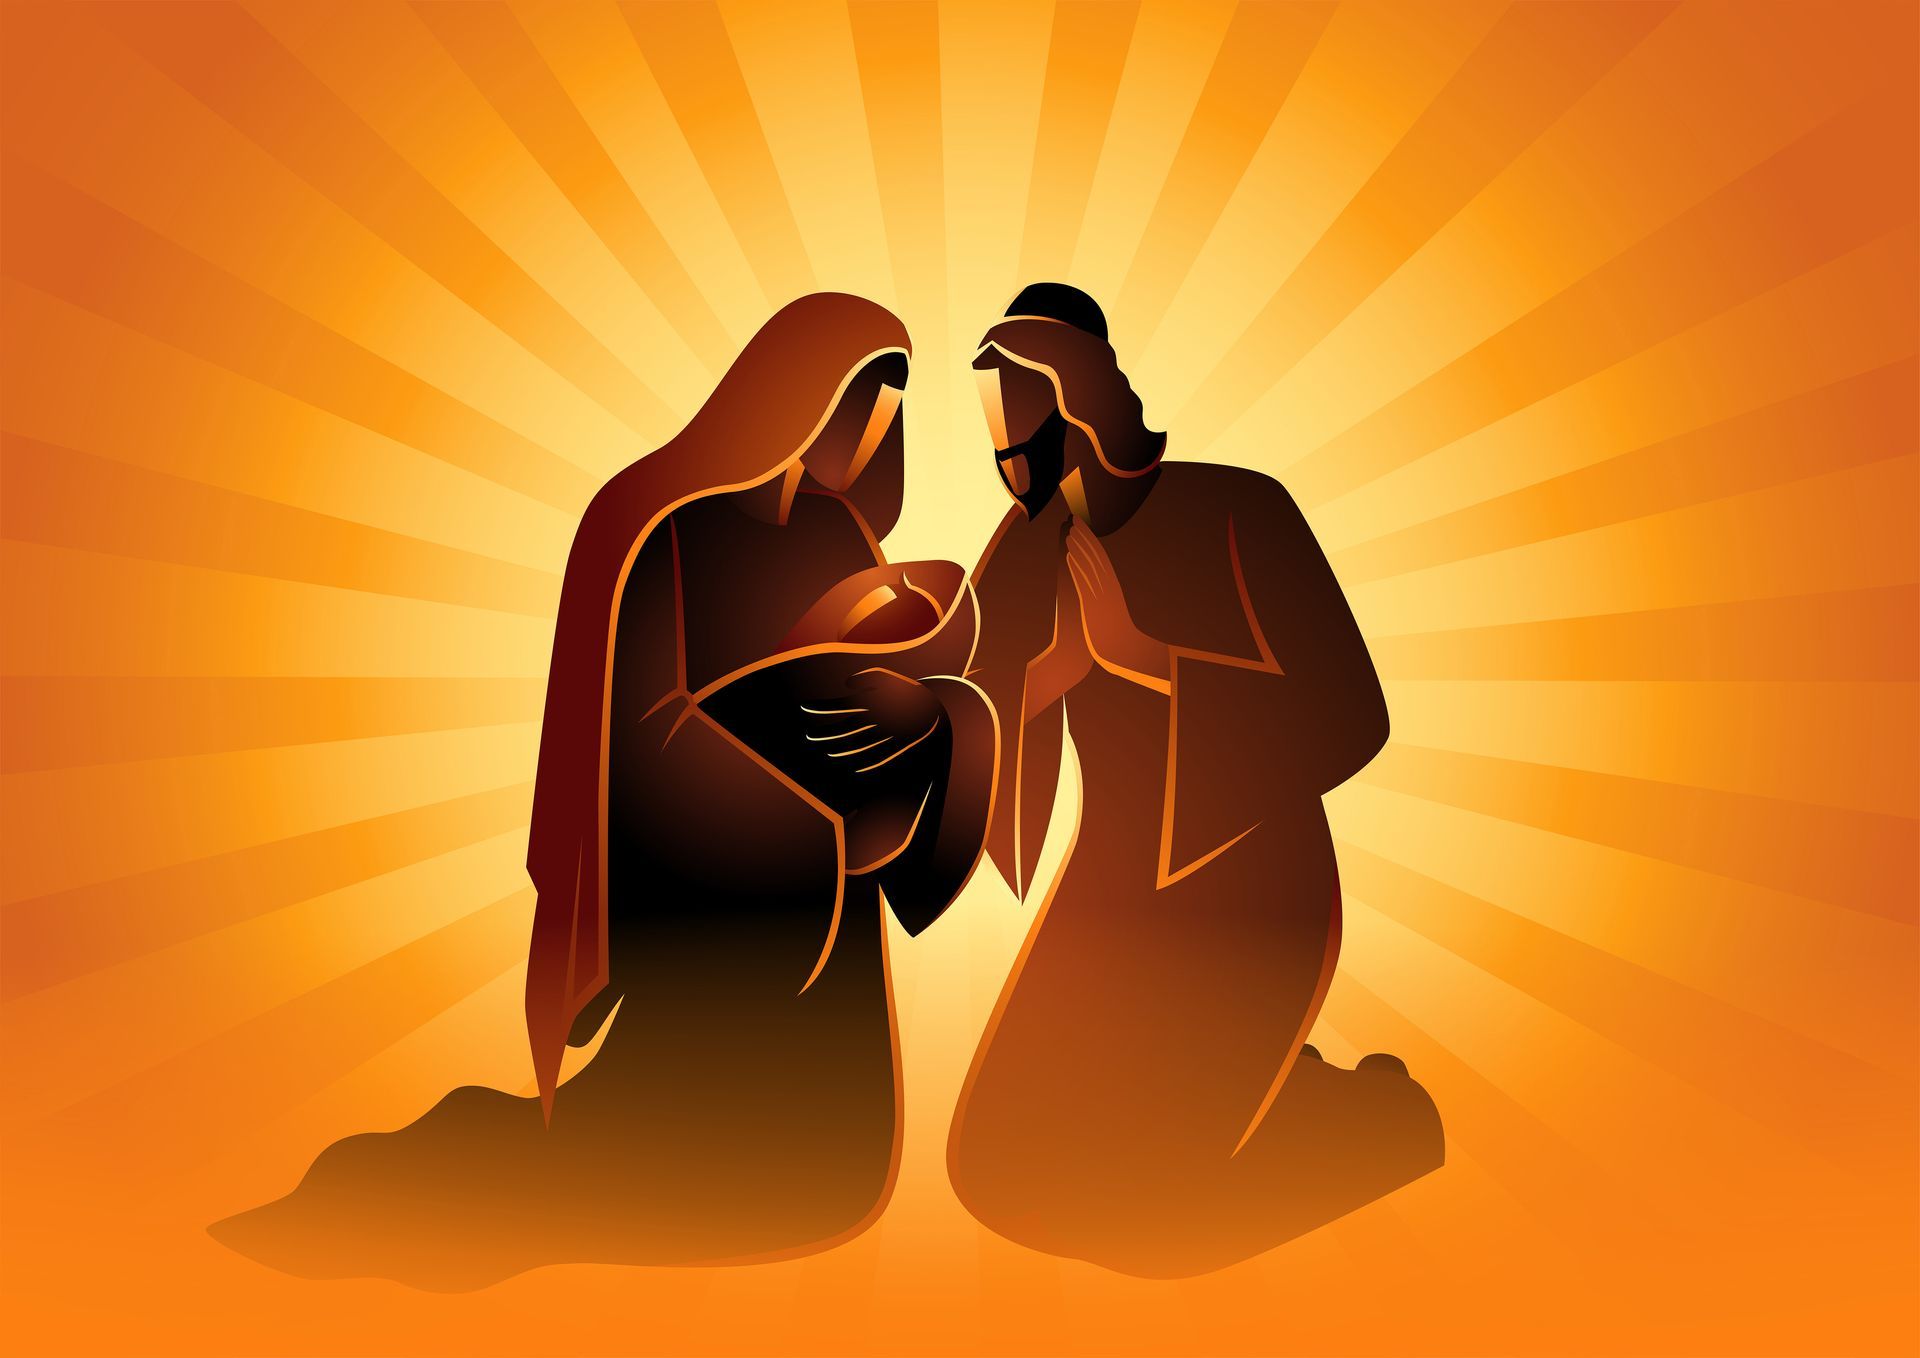 a silhouette of a man and woman kneeling next to each other